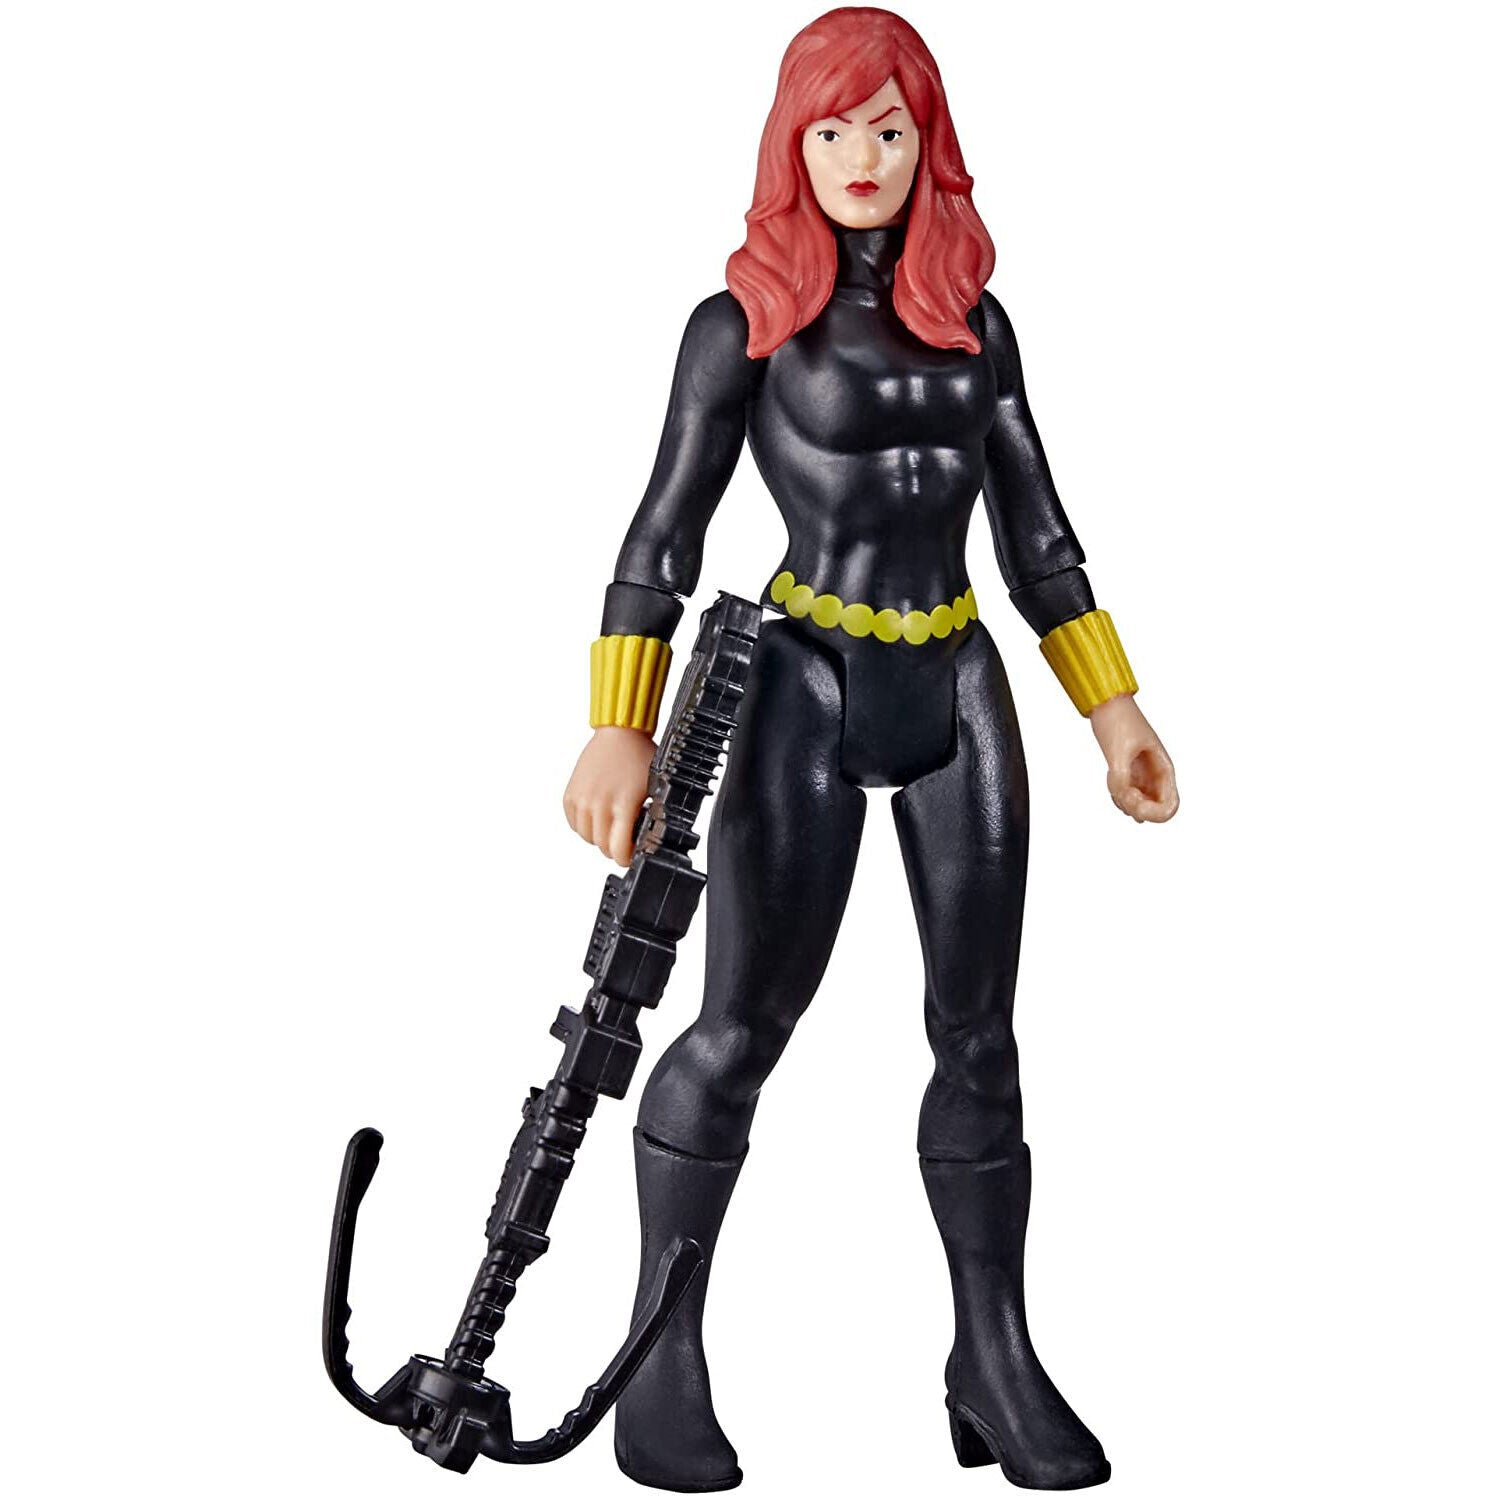 New Marvel Legends Retro Black Widow 3.75-Inch Figure - Collectible Toy